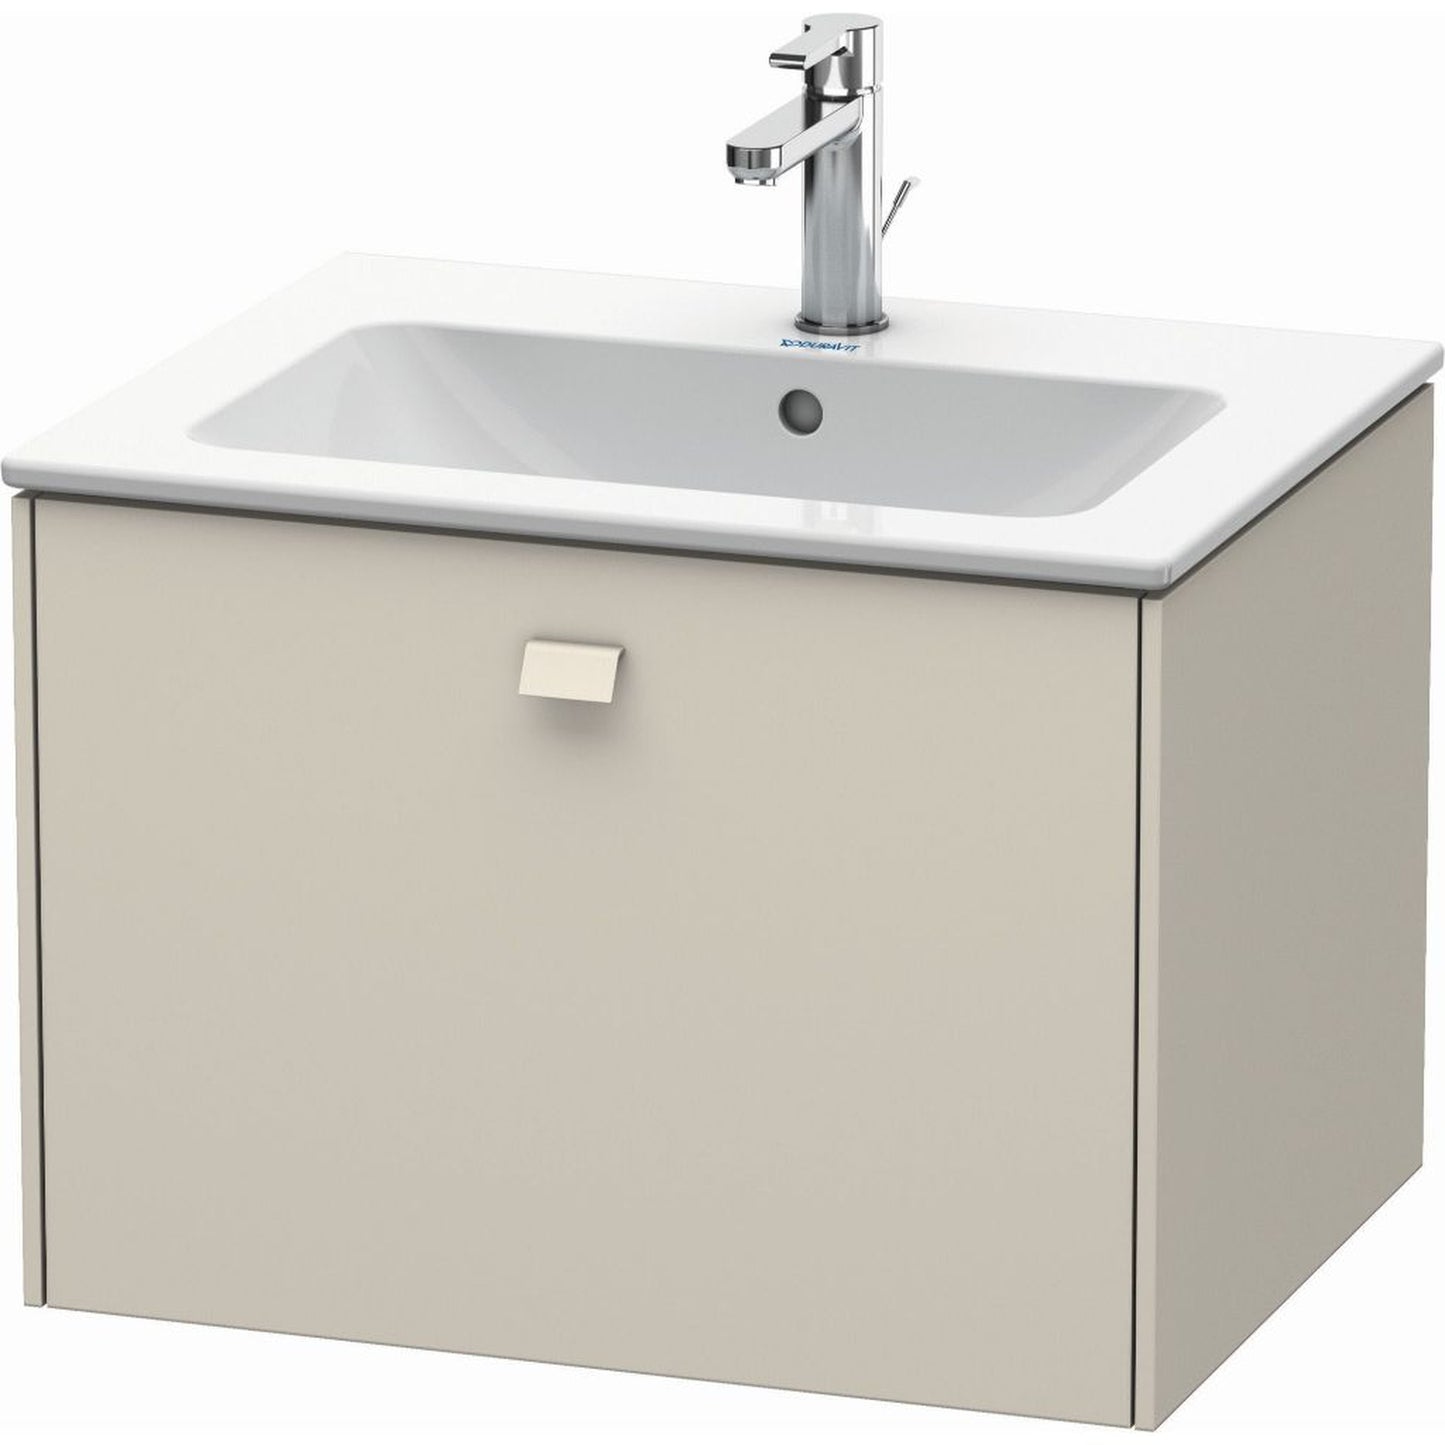 Duravit Brioso 24" x 17" x 19" One Drawer Wall-Mount Vanity Unit in Taupe